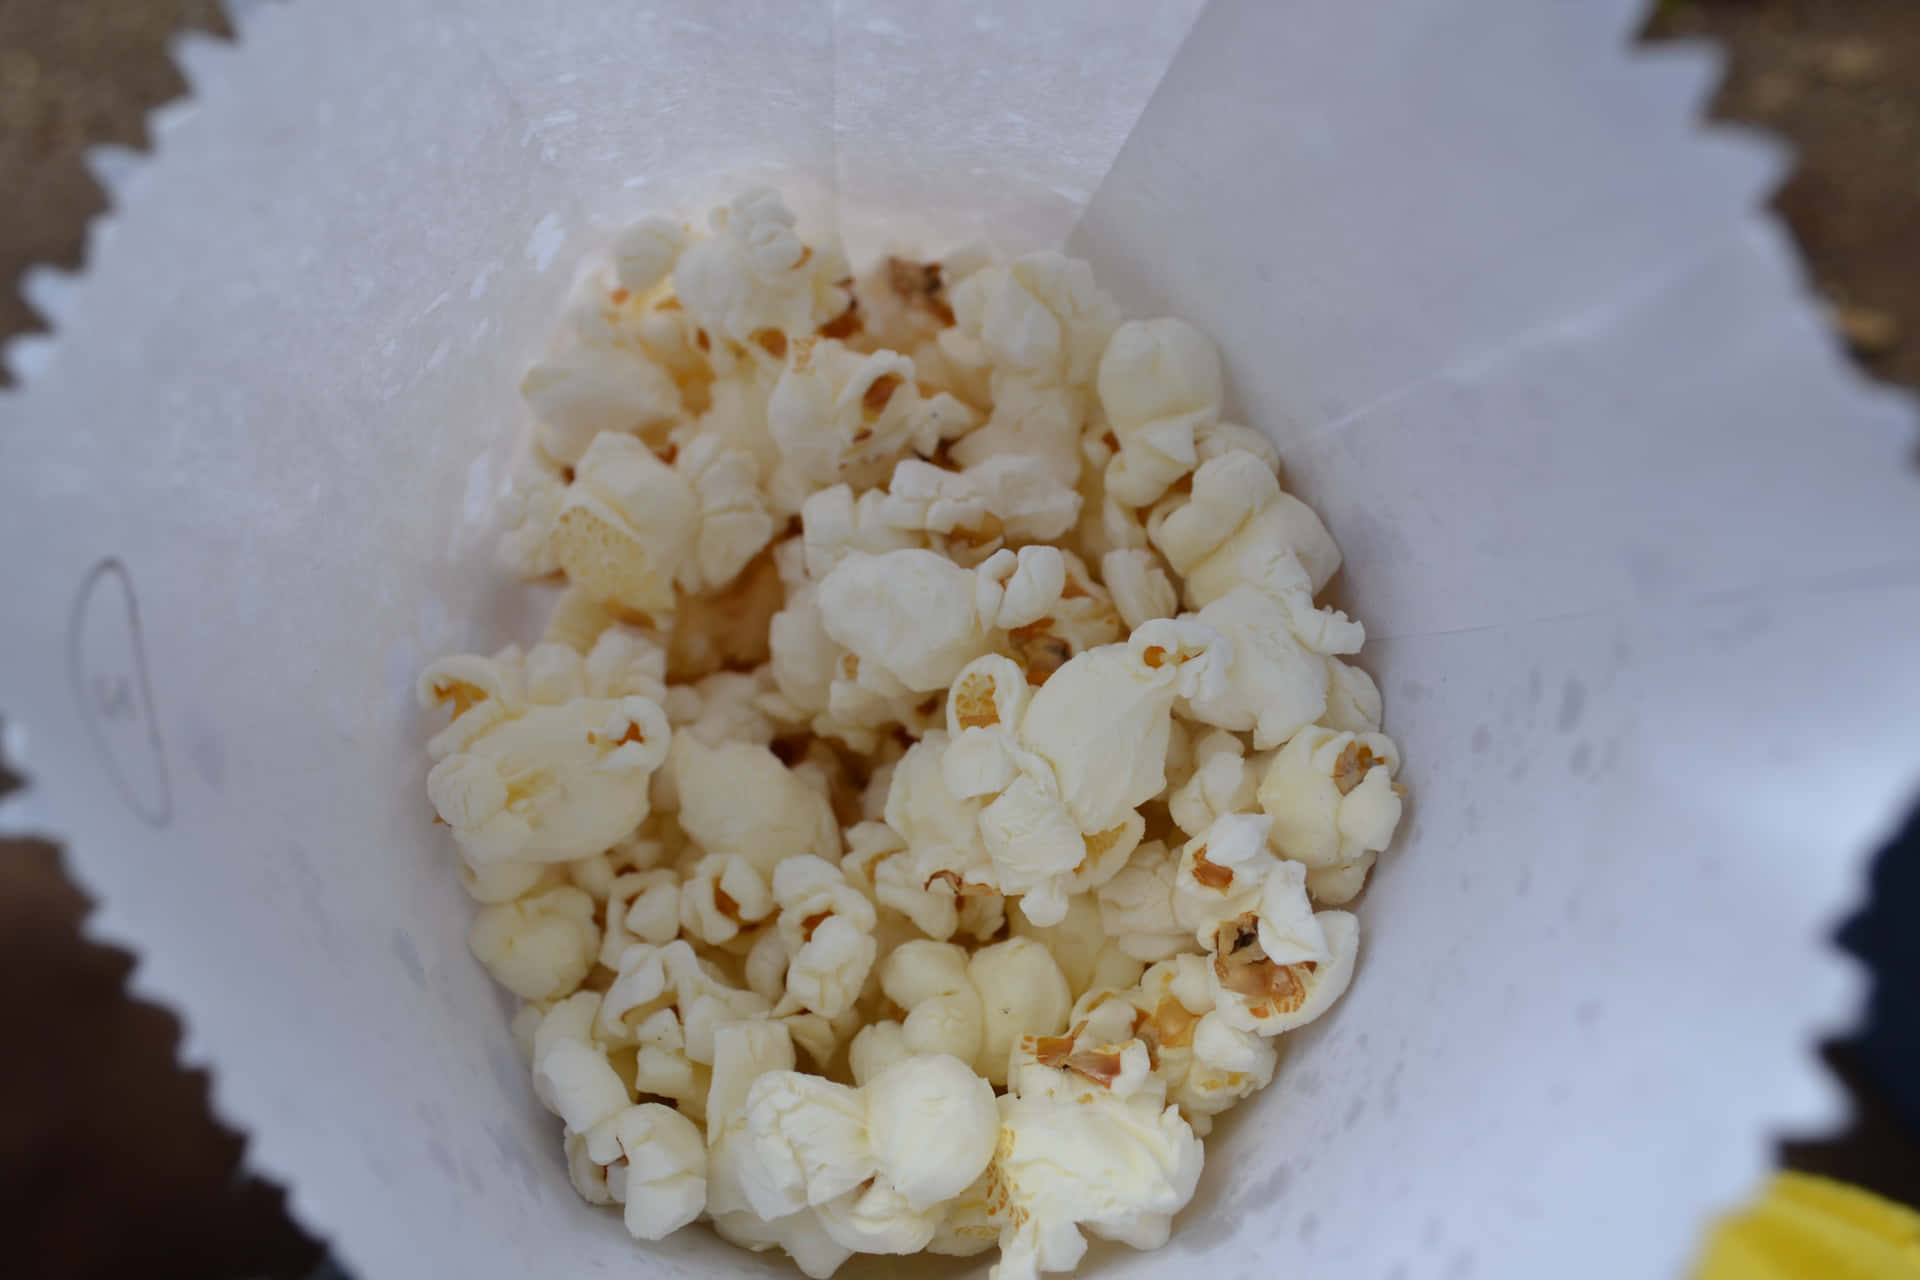 Enjoy a moment of joy with a freshly popped bowl of popcorn.